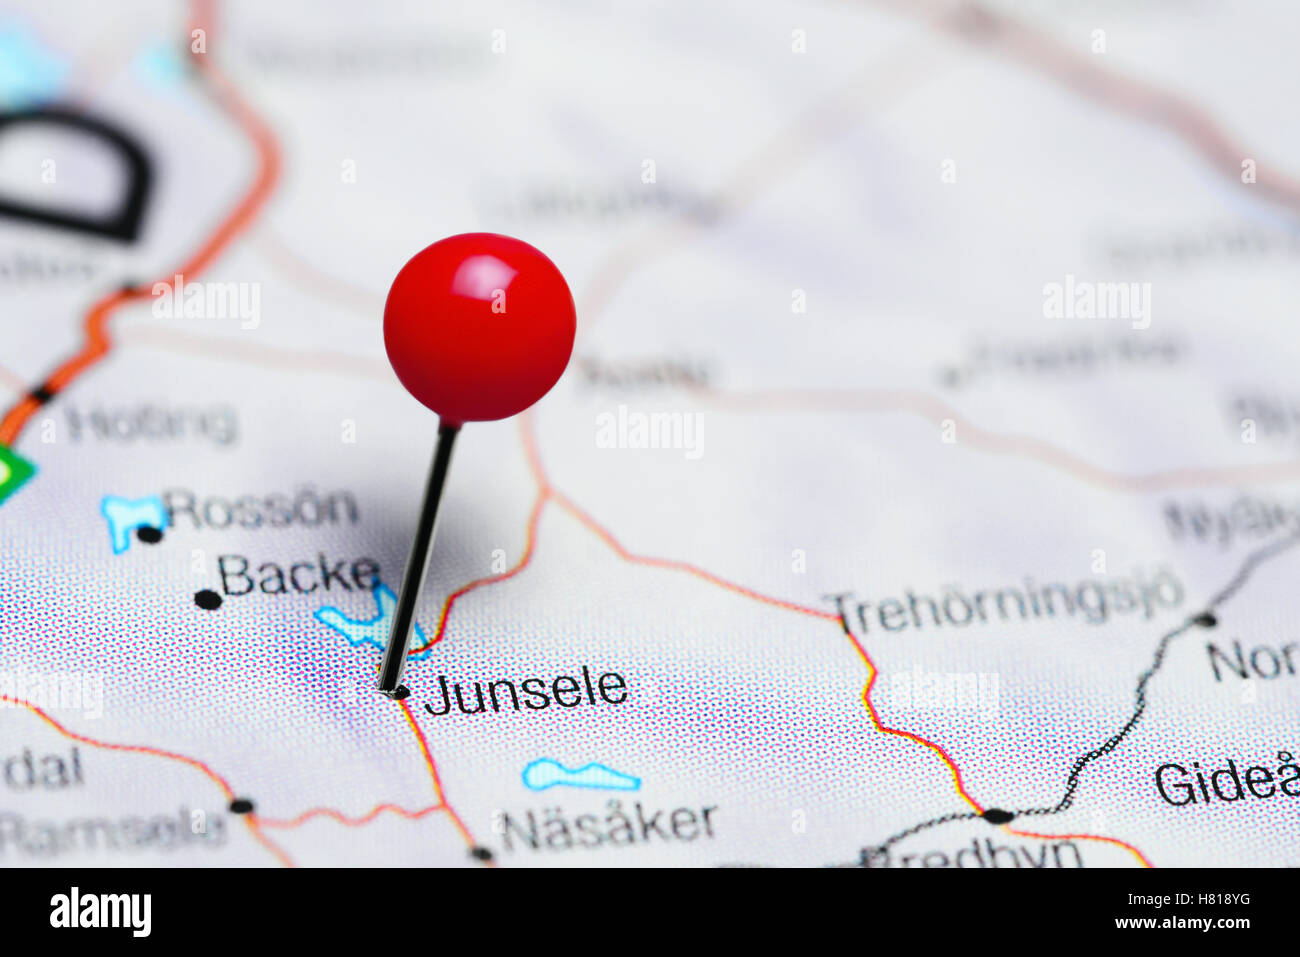 Junsele pinned on a map of Sweden Stock Photo